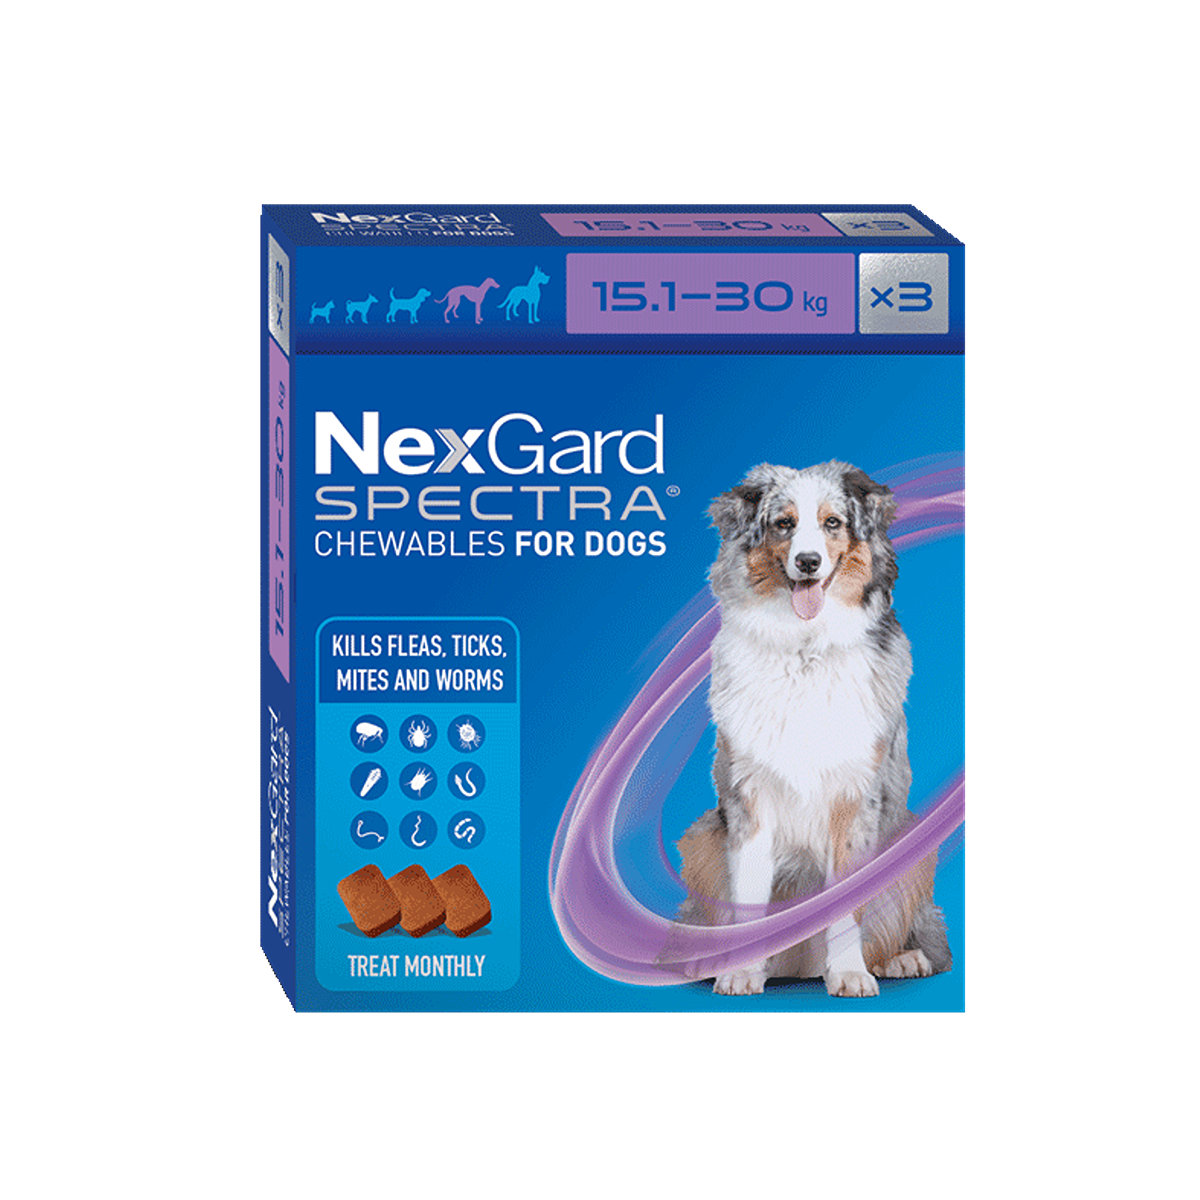 NexGard Spectra Chewables for Large Dogs 15.1-30kg